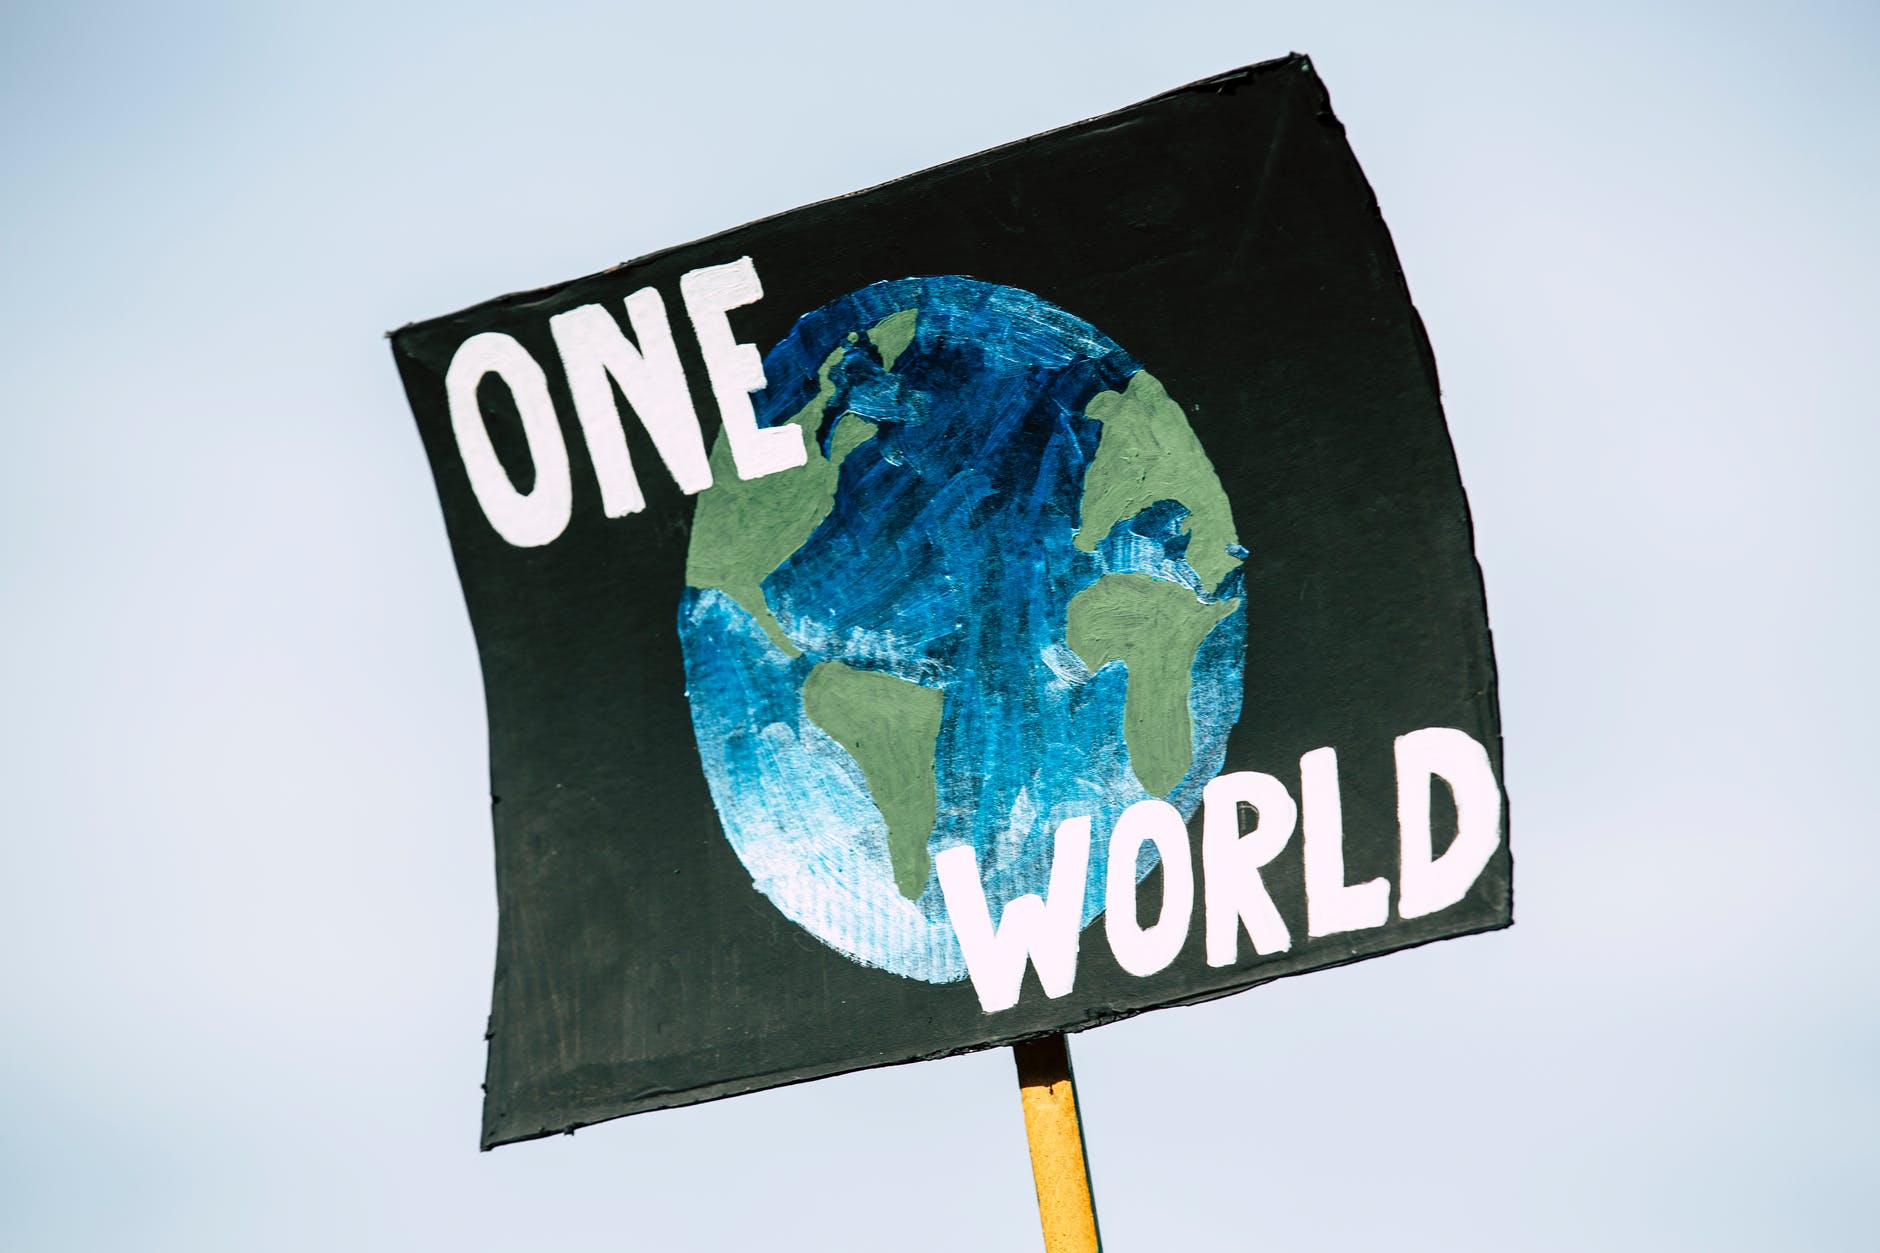 Picture of "one world" text with image of the Earth as a sign.